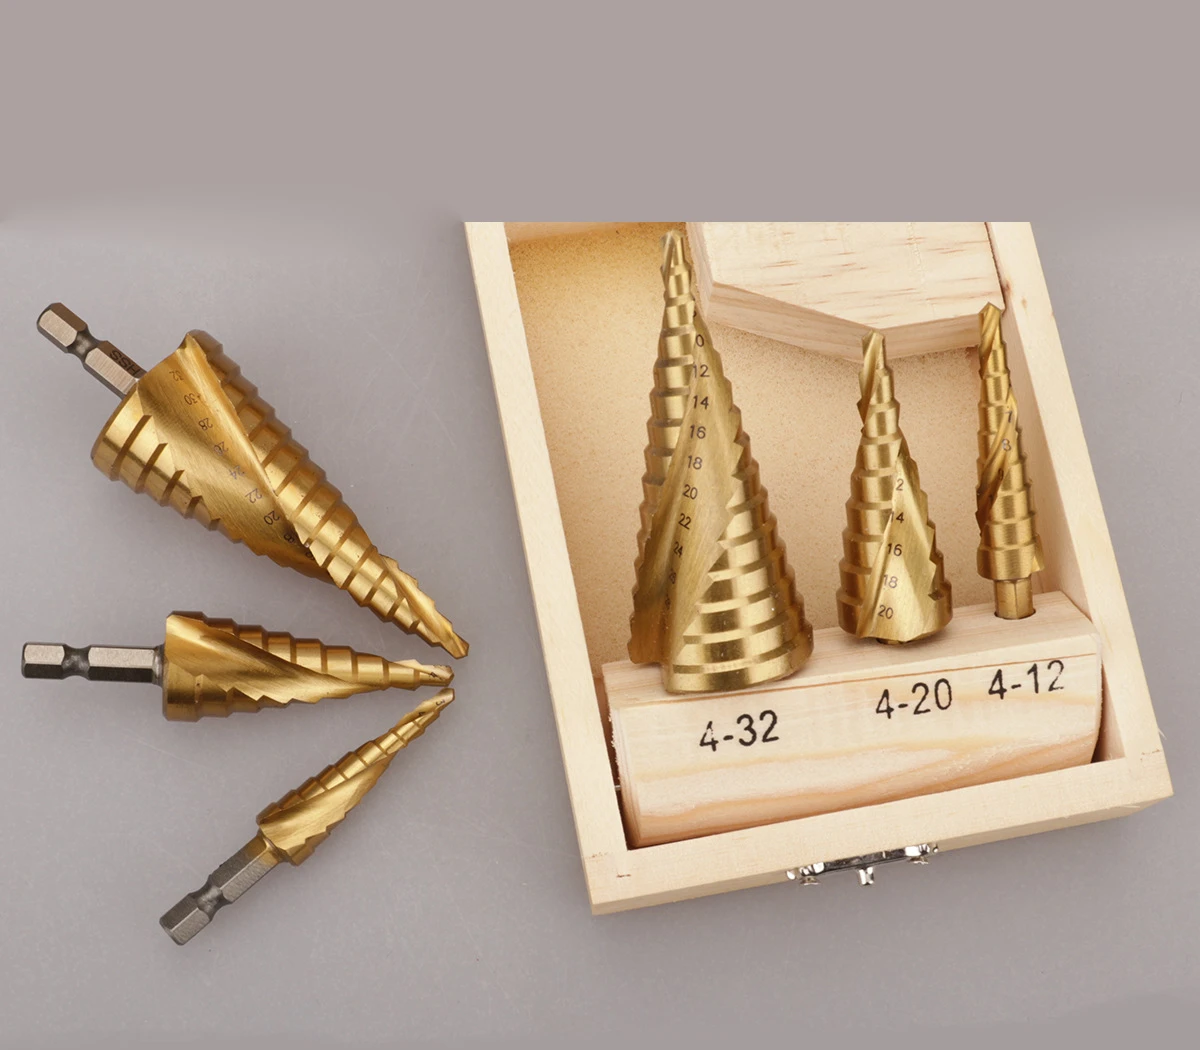 3PCS Step Drill Bit Set HSS Titanium Coated Spiral Grooved Drill Bits with Hex Shank Automatic Spring Loaded Center Punch